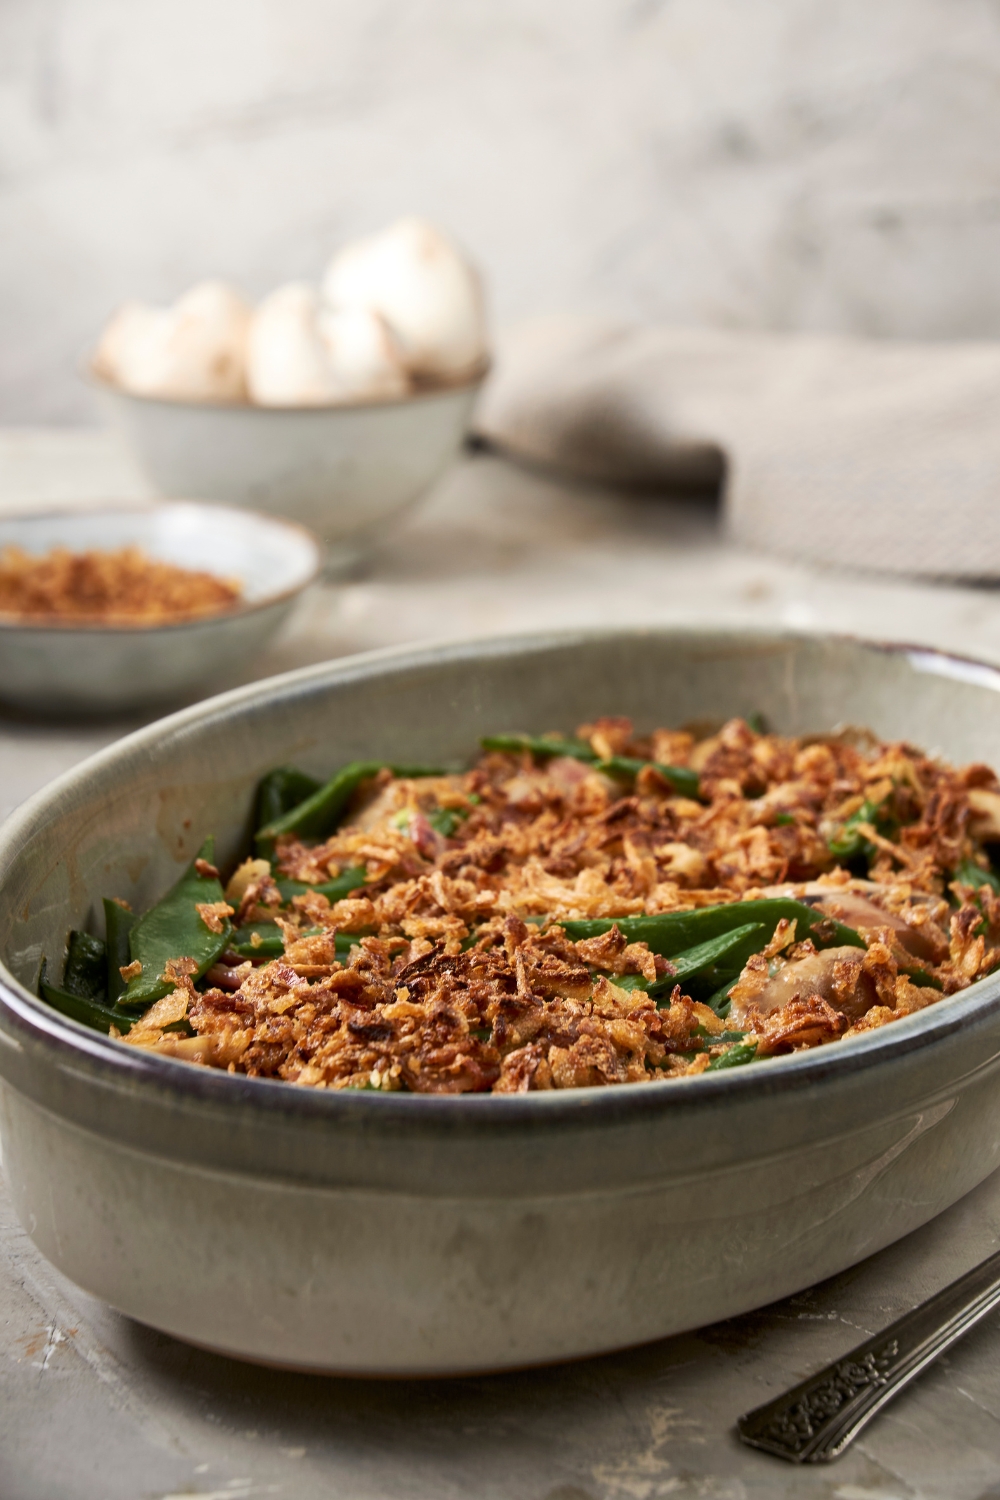 A large casserole dish full of green bean casserole sits on a gray counter. The top is full of golden brown crispy onions.